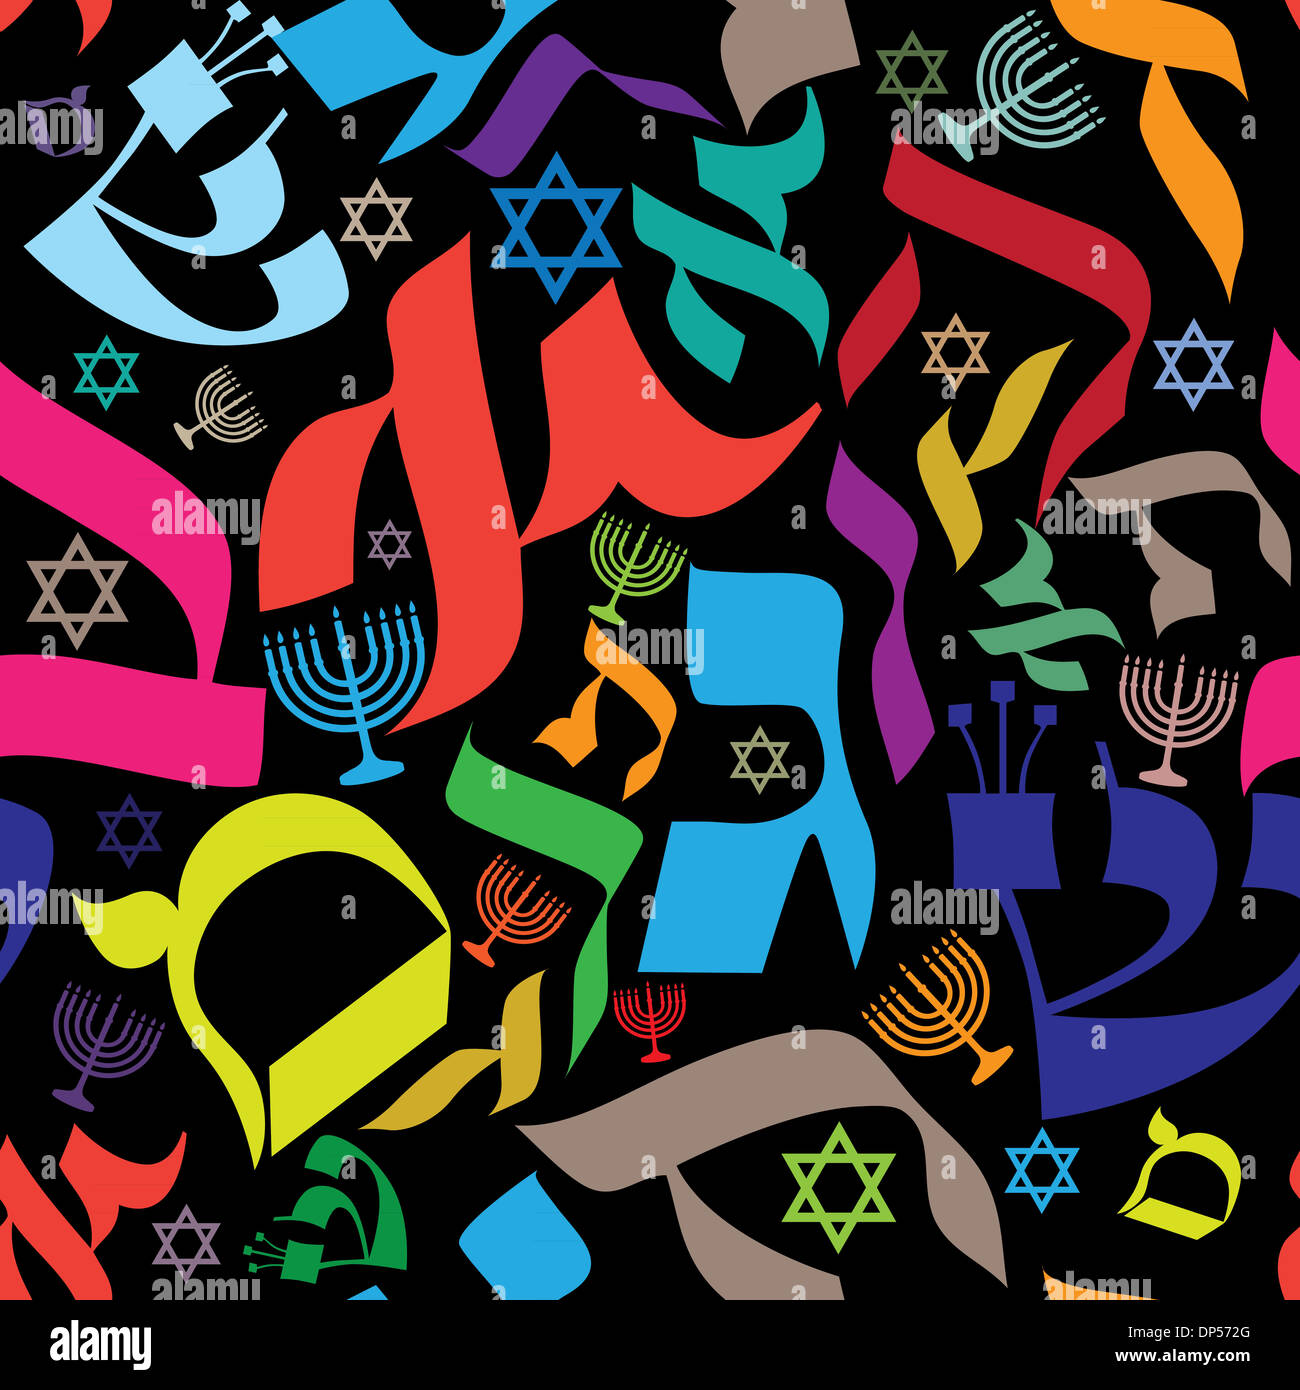 Vector seamless pattern design with Hebrew letters and Judaic icons Stock Photo